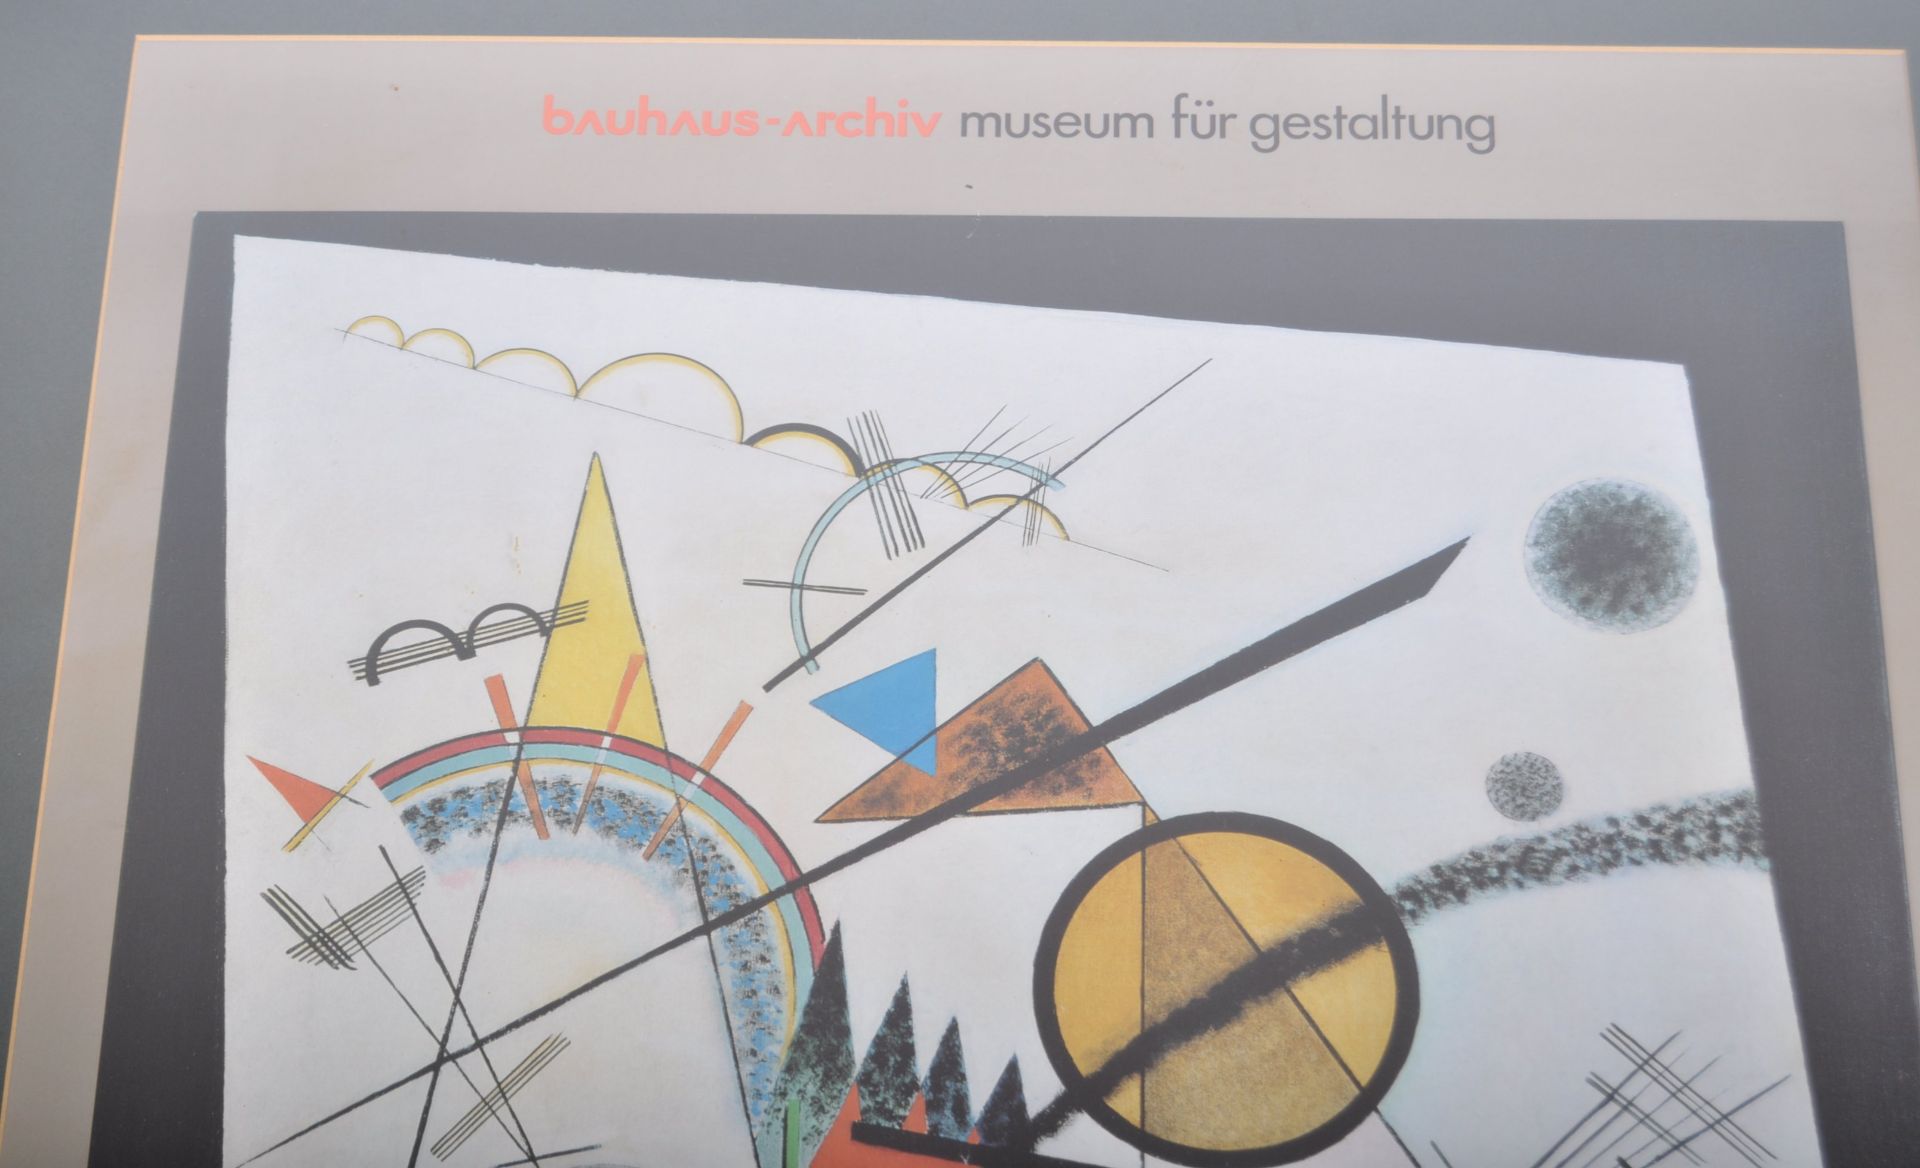 KANDINSKY 1980'S MUSEUM EXHIBITION POSTER FOR BAUHAUS ARCHIV MUSEUM - Image 3 of 5